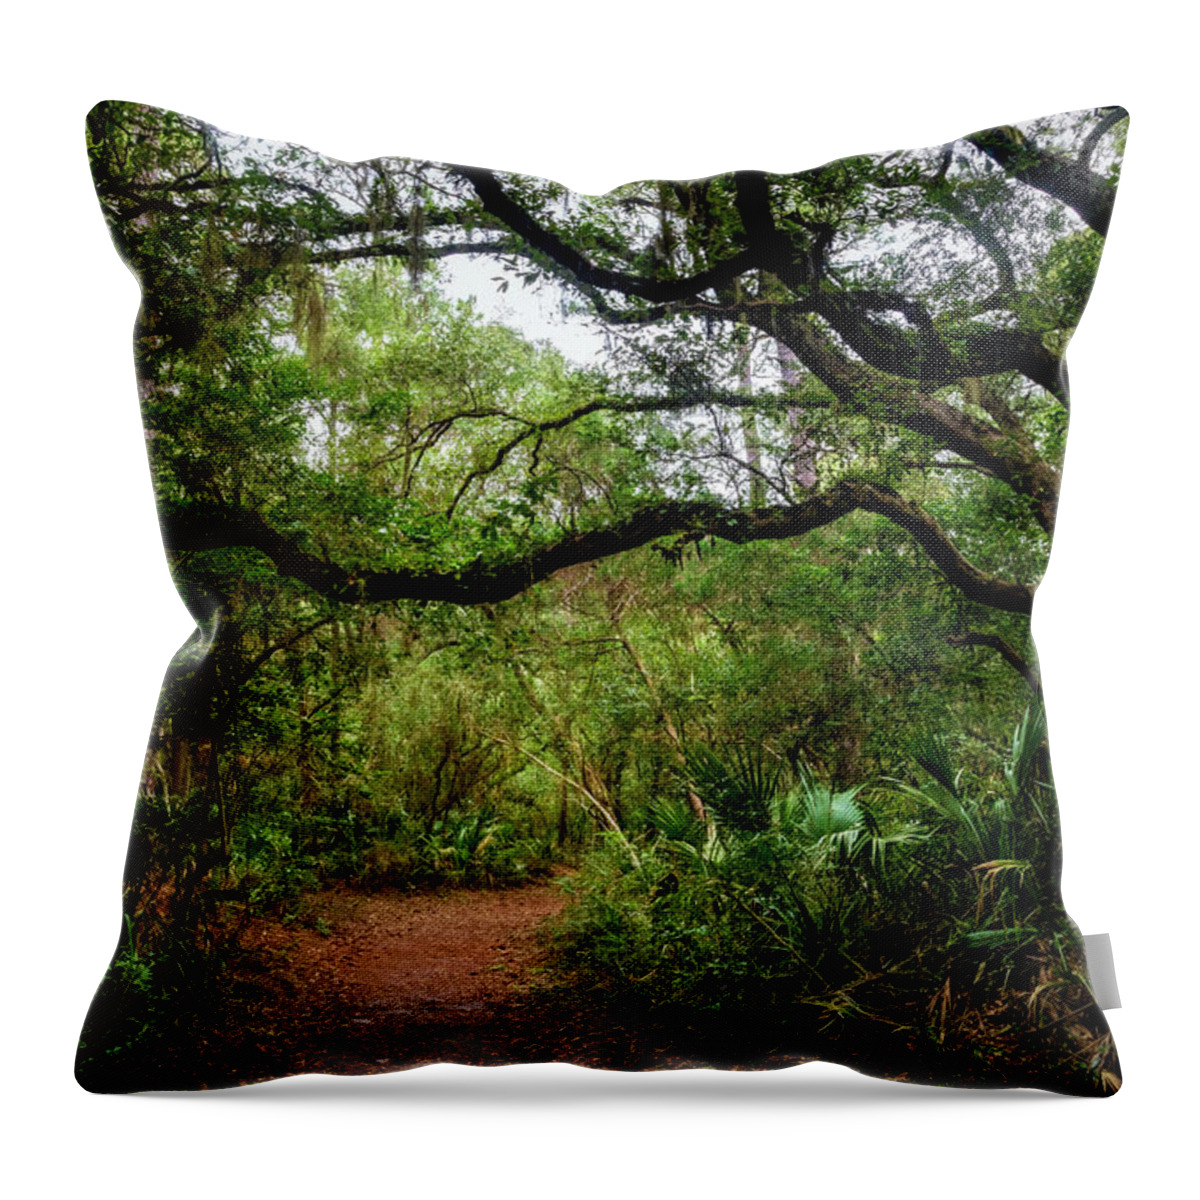 Trail Throw Pillow featuring the photograph Little Talbot Island Winding Trail by Debra and Dave Vanderlaan